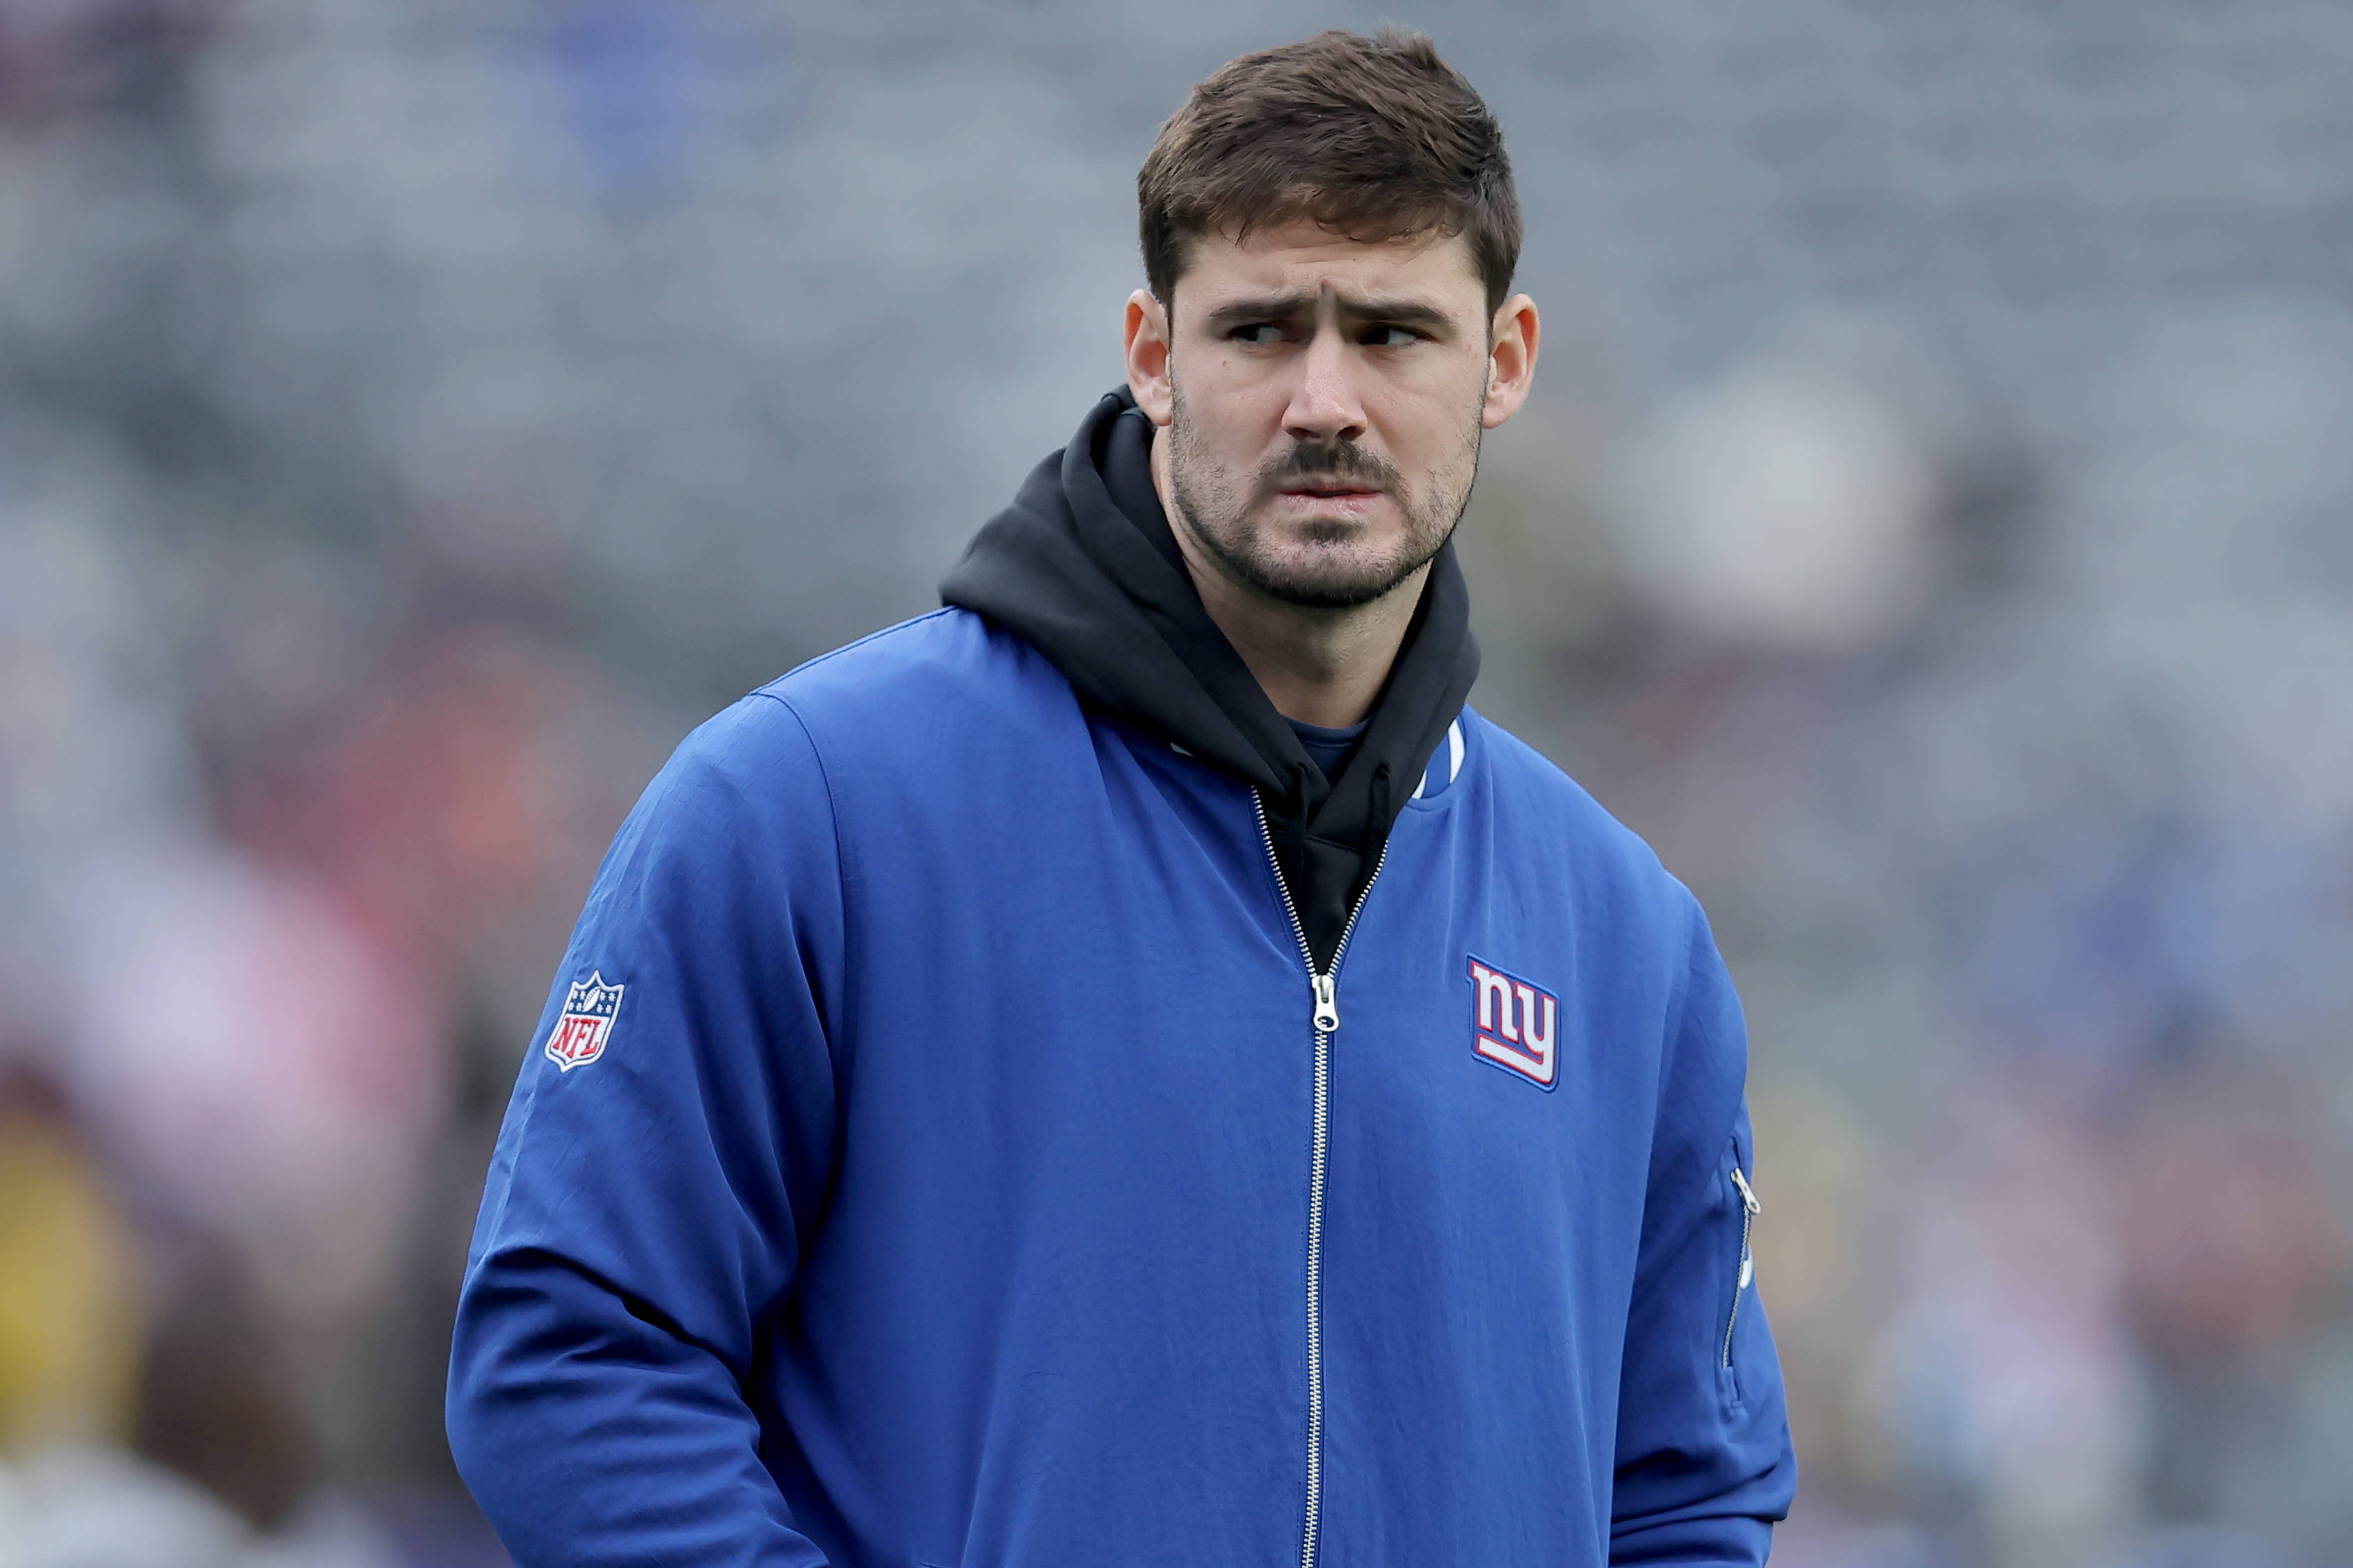 Ex-NFL GM criticizes Giants for sticking with Daniel Jones: 'It's a shame'